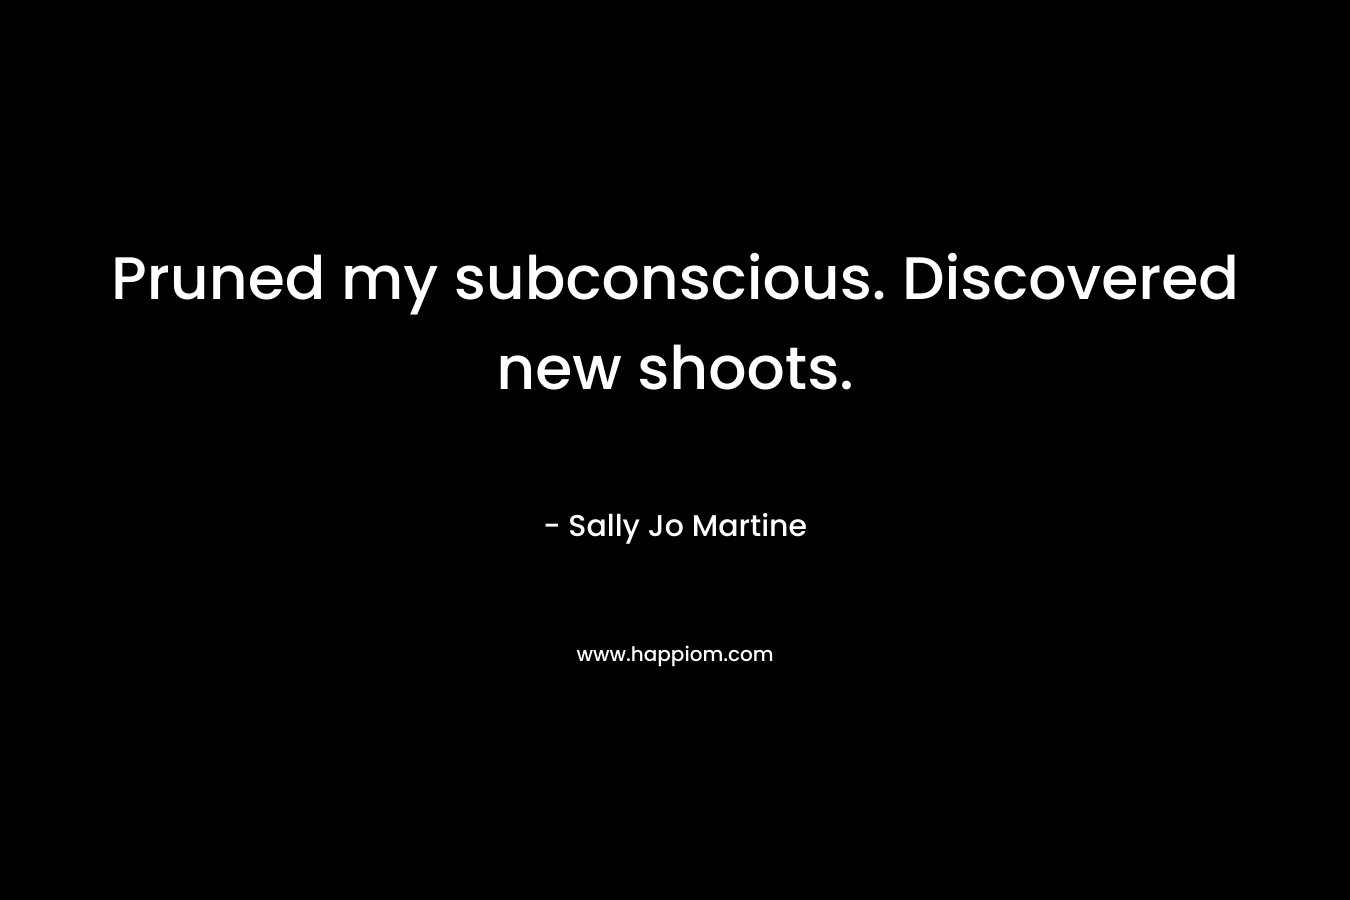 Pruned my subconscious. Discovered new shoots. – Sally Jo Martine